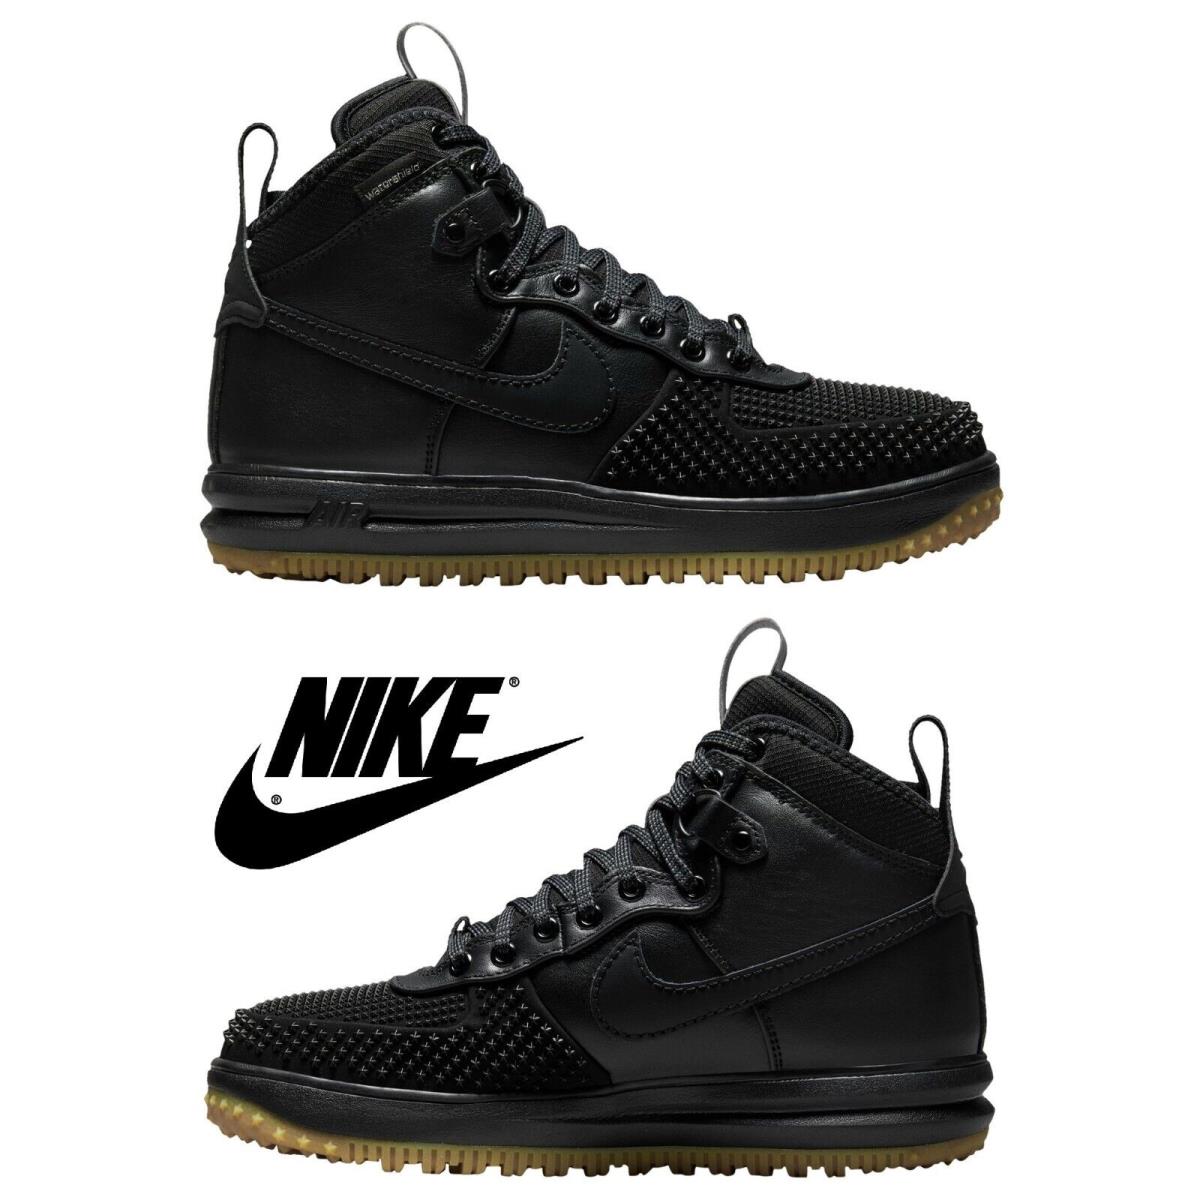 Nike Lunar Force 1 Duckboot Men`s Boots Hiking Water-resistant Leather Shoes